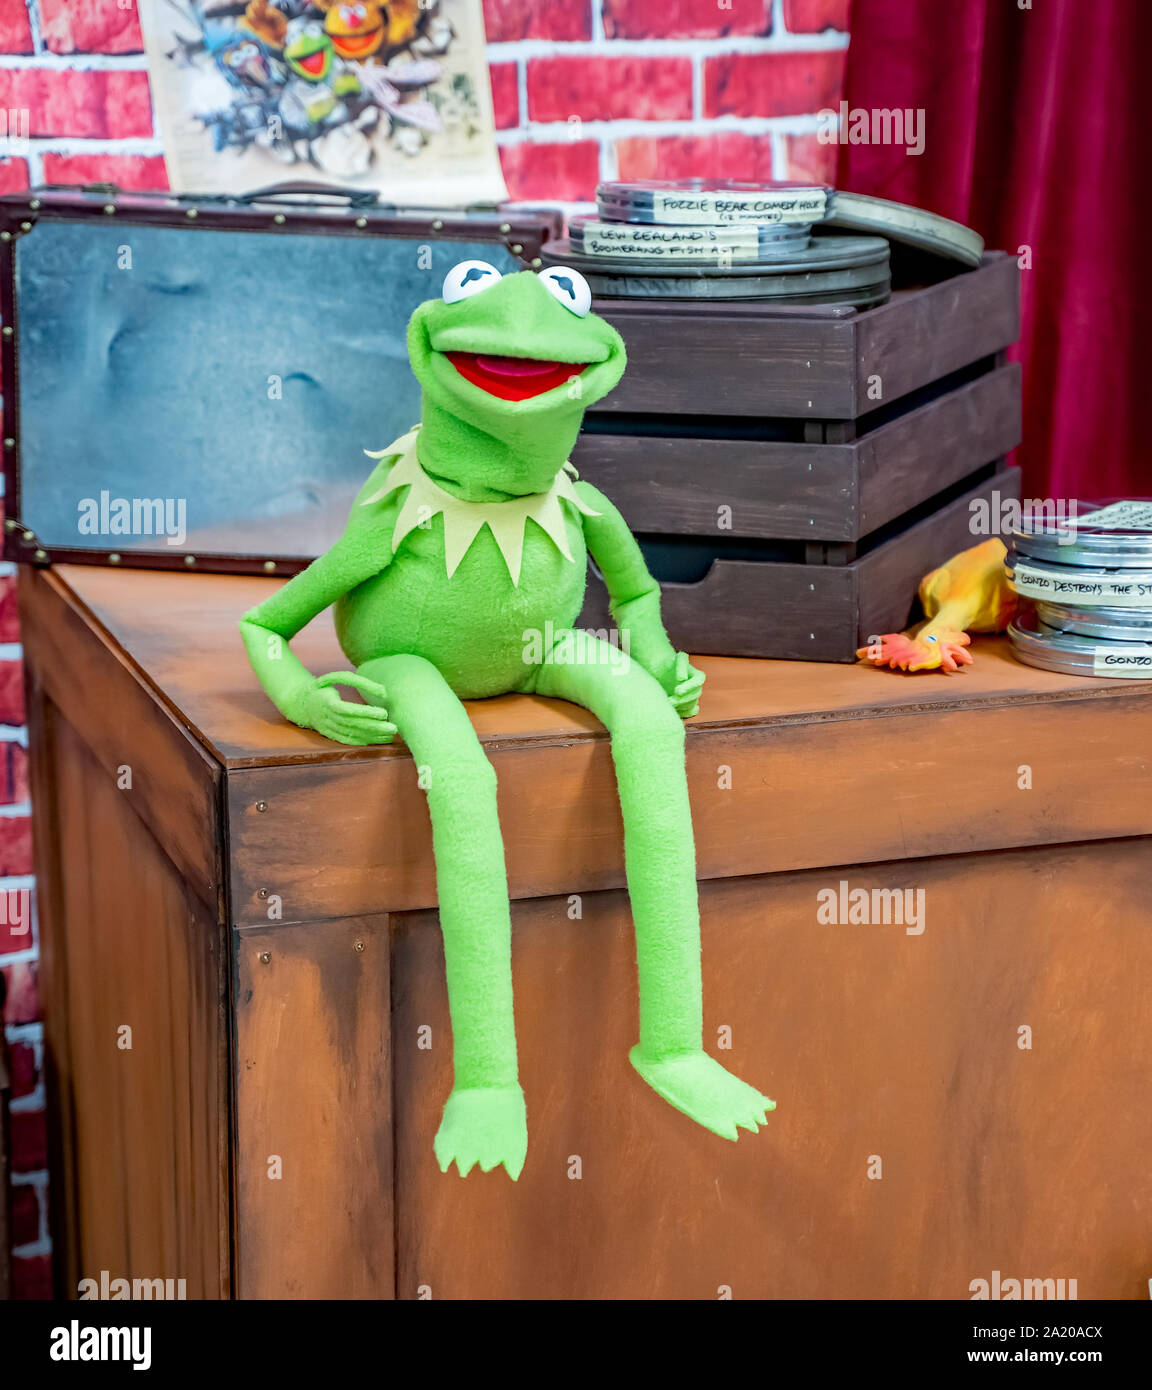 A talking Kermit the Frog puppet sat on a wooden box entertaining guest attending the annual Nor-Con movie and comic book convention Stock Photo